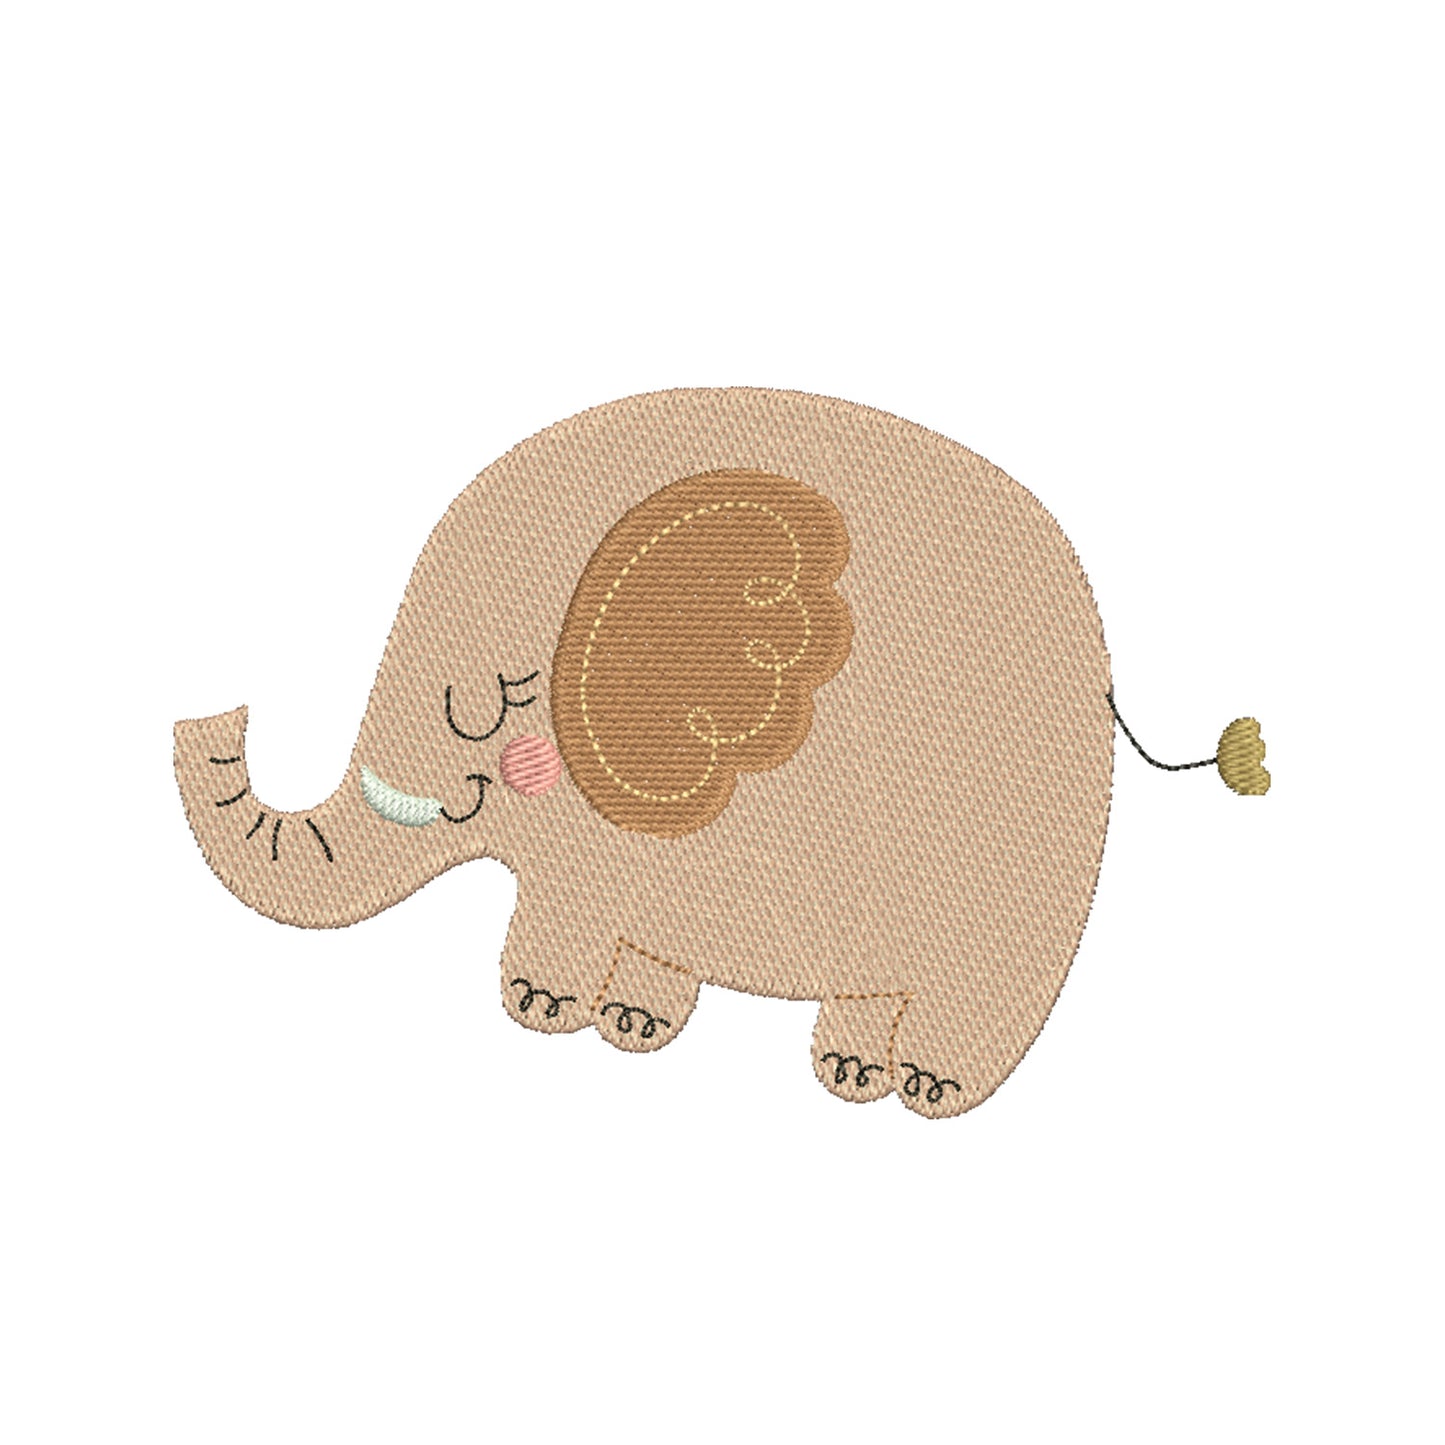 Elephant machine embroidery designs for kids - 170096